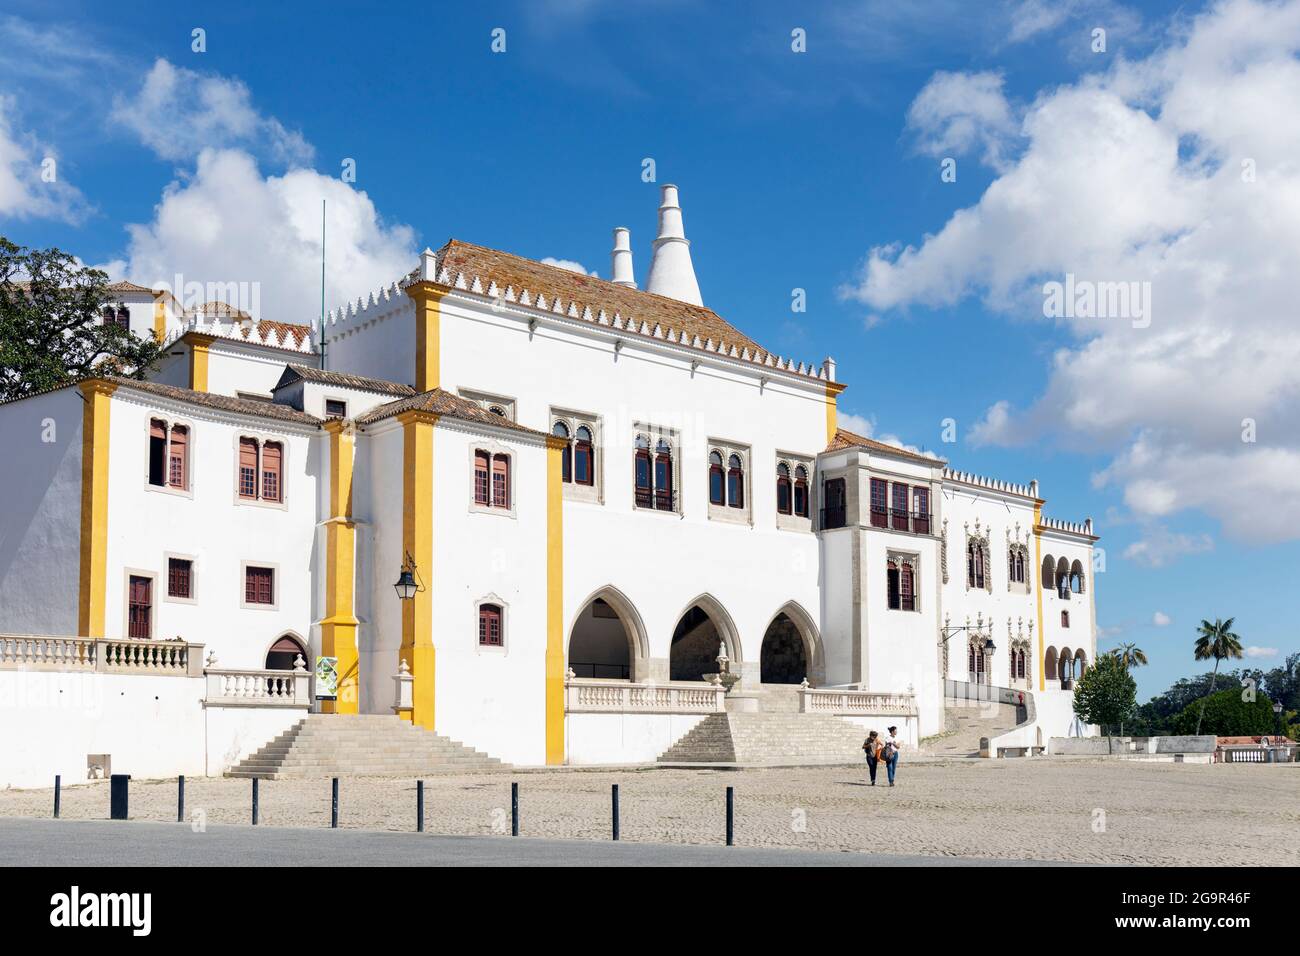 The Royal Palace, Sintra, Lisbon District, Portugal, also called the Palace of Sintra or the Town Palace.  The palace, once a royal residence and now Stock Photo